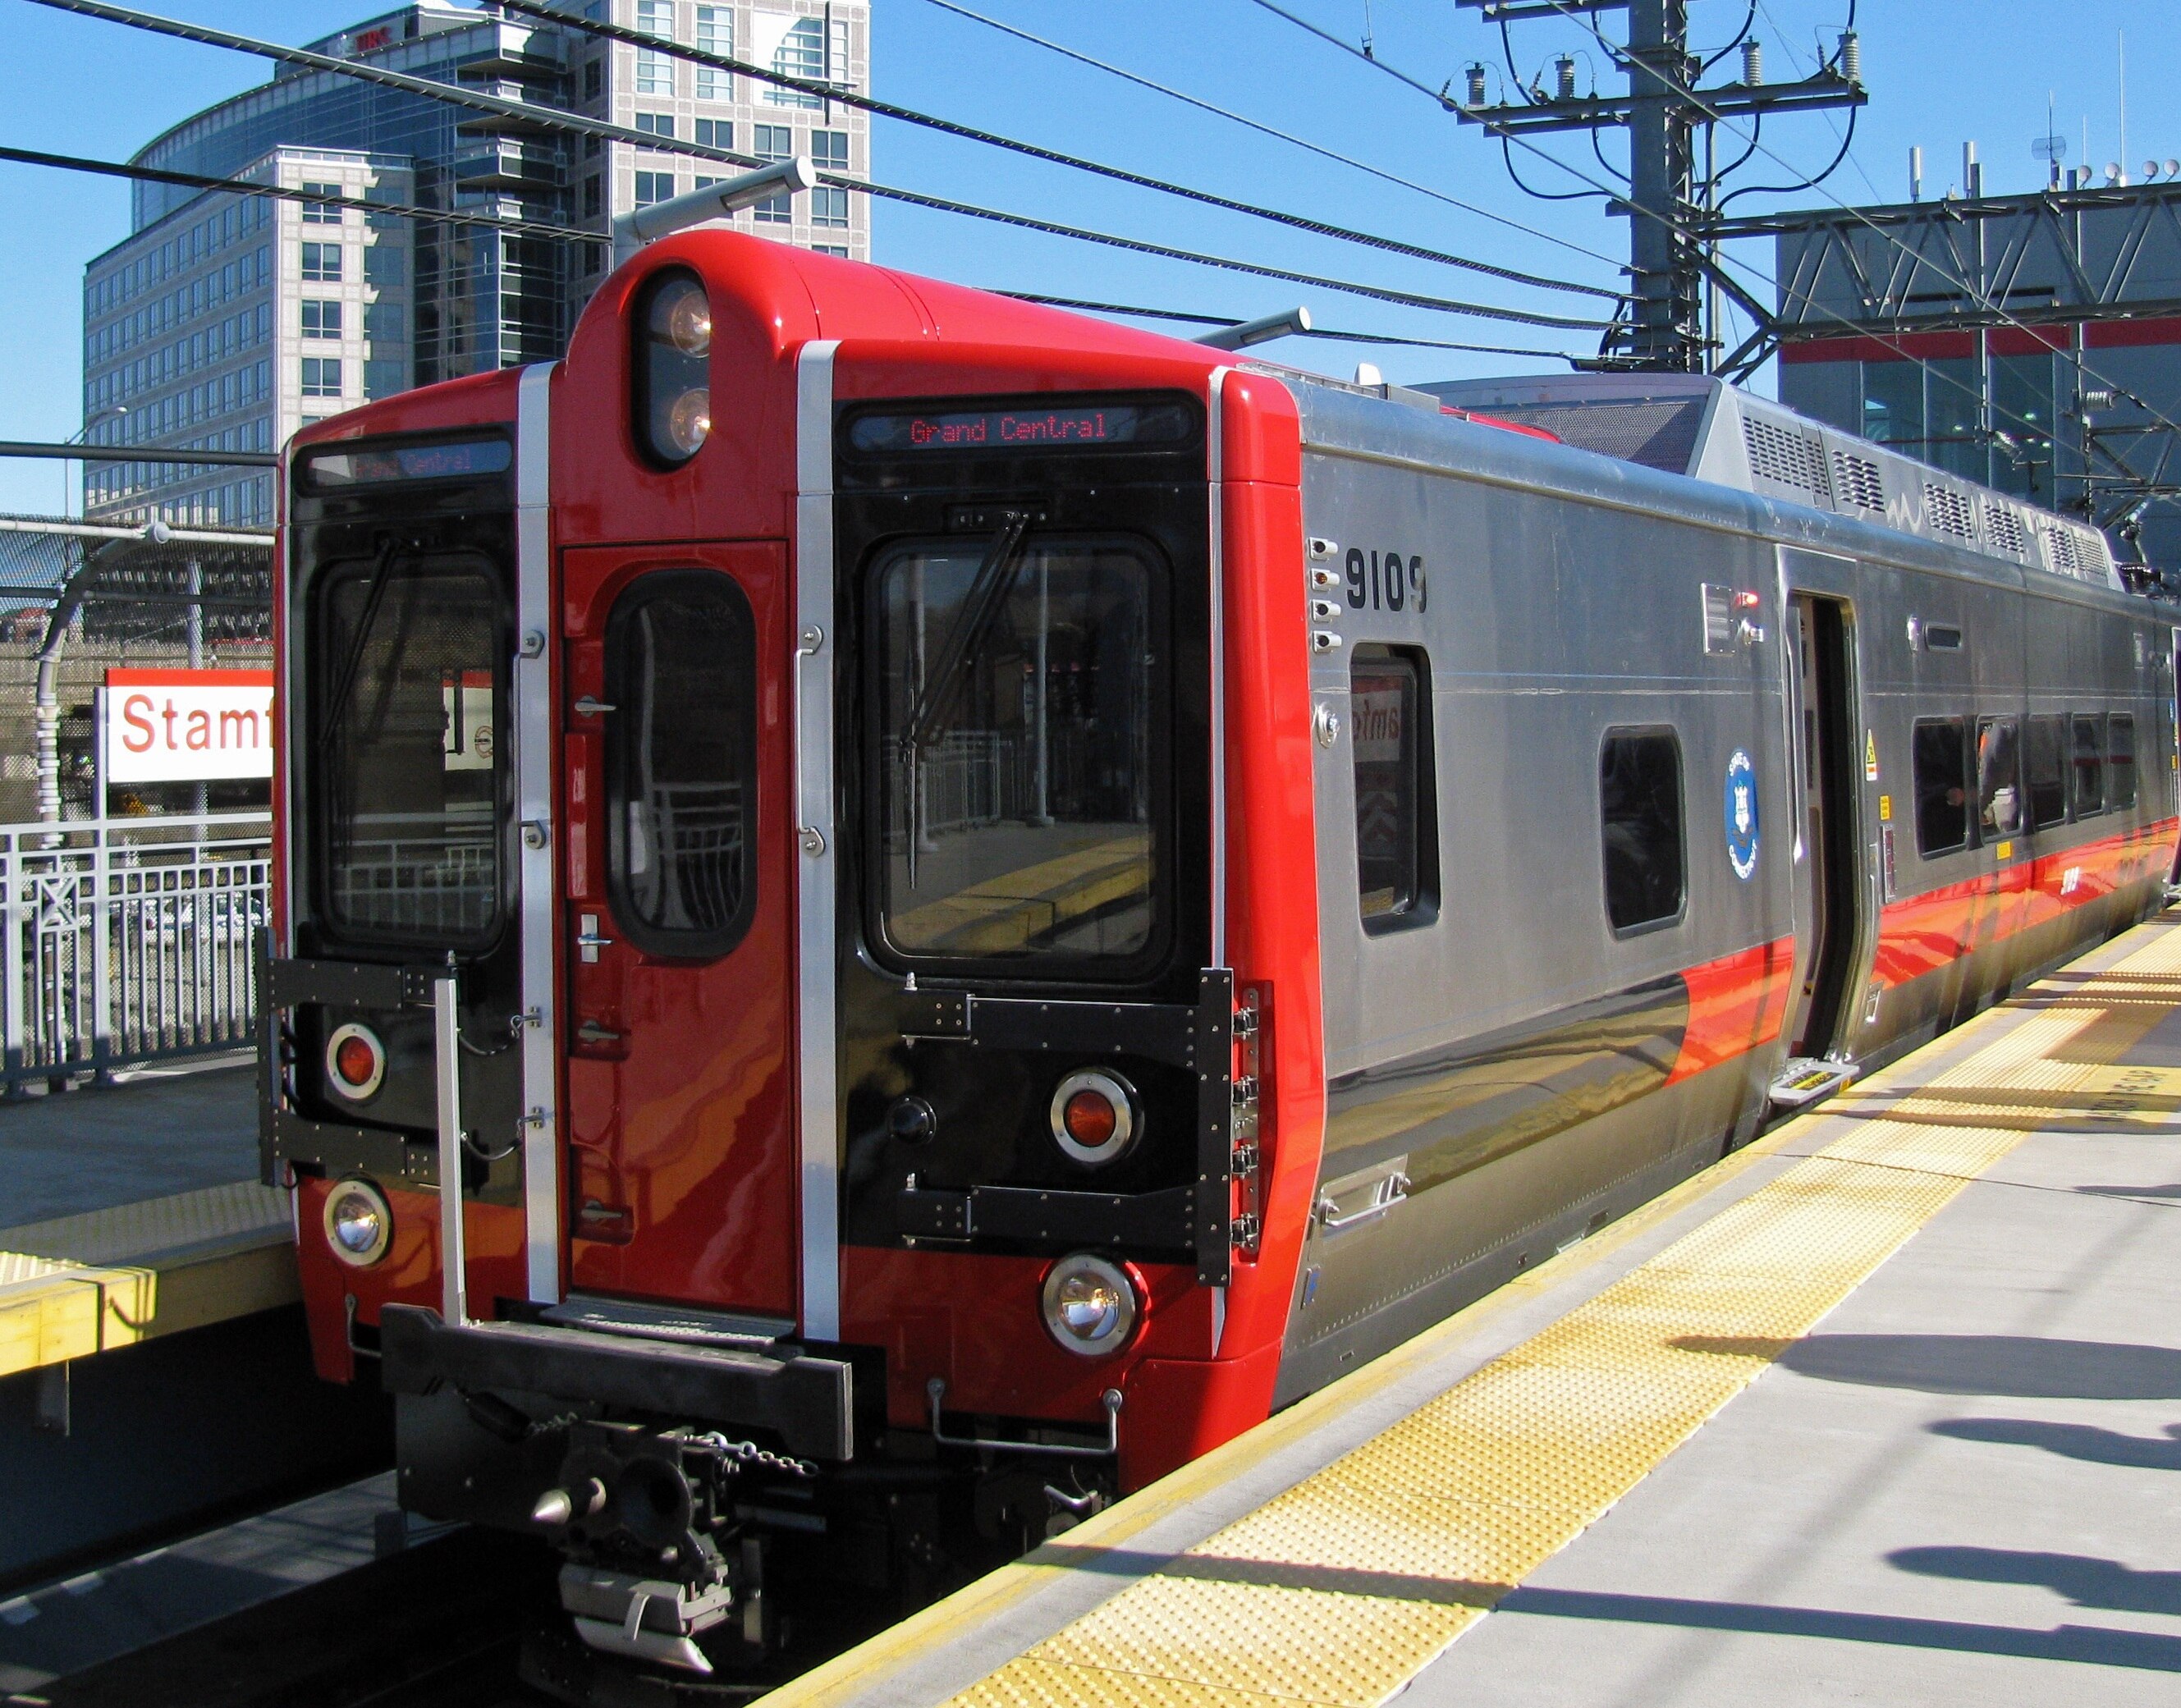 Metro-North Railroad Timetables to Take Effect July 10 Will Add Six Express Trains on the New Haven Line and Increase Waterbury Branch Service by 47%